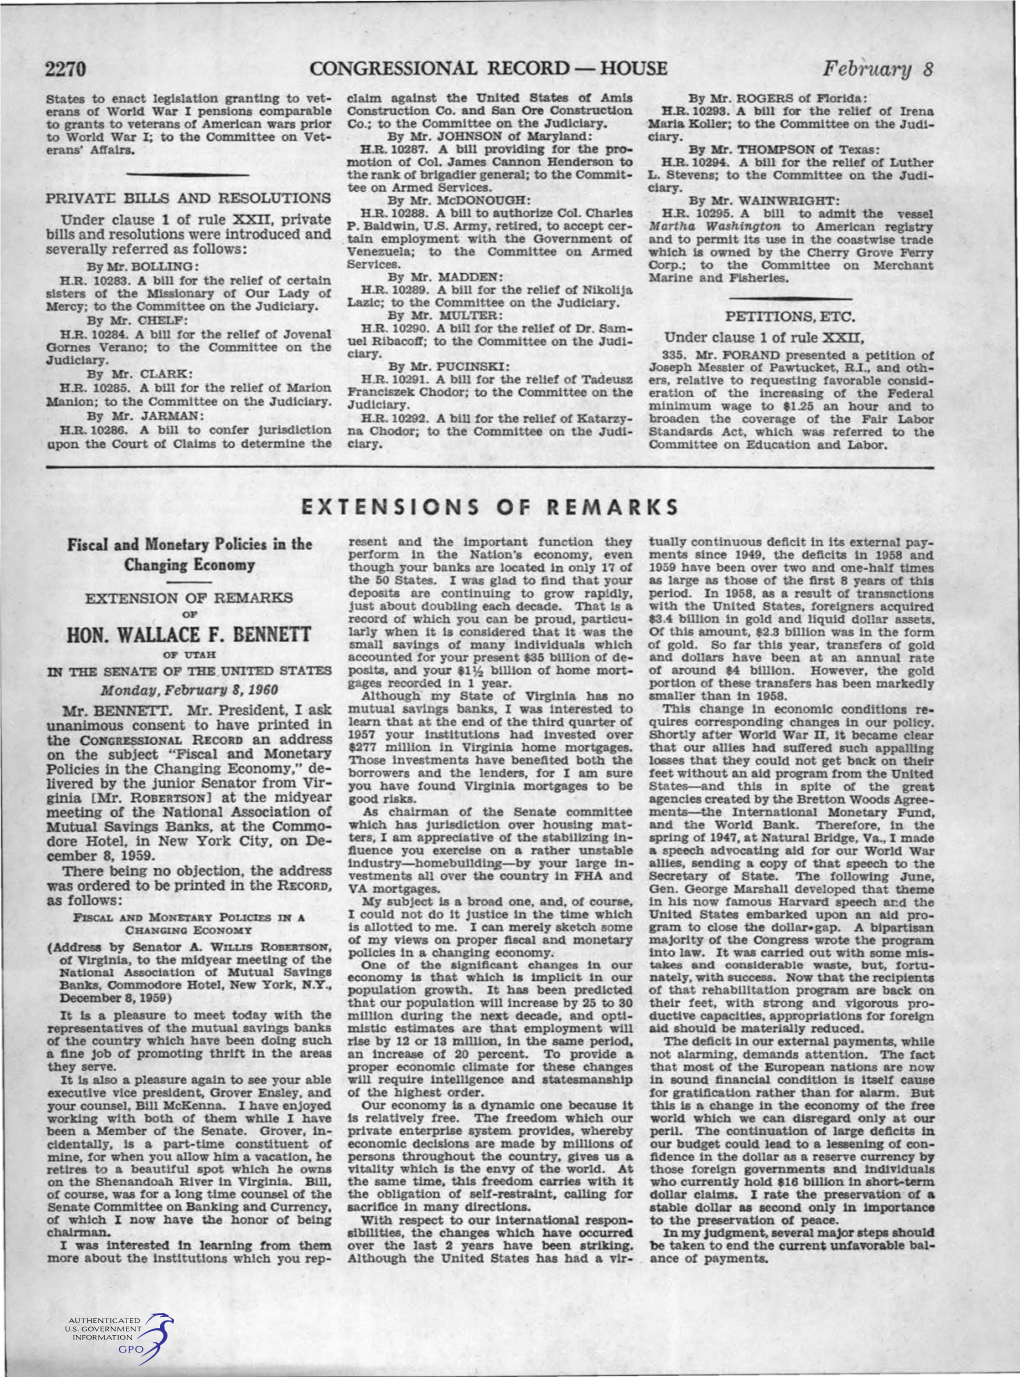 2270 February 8 EXTENSIONS of REMARKS HON. WALLACE F. BENNETT